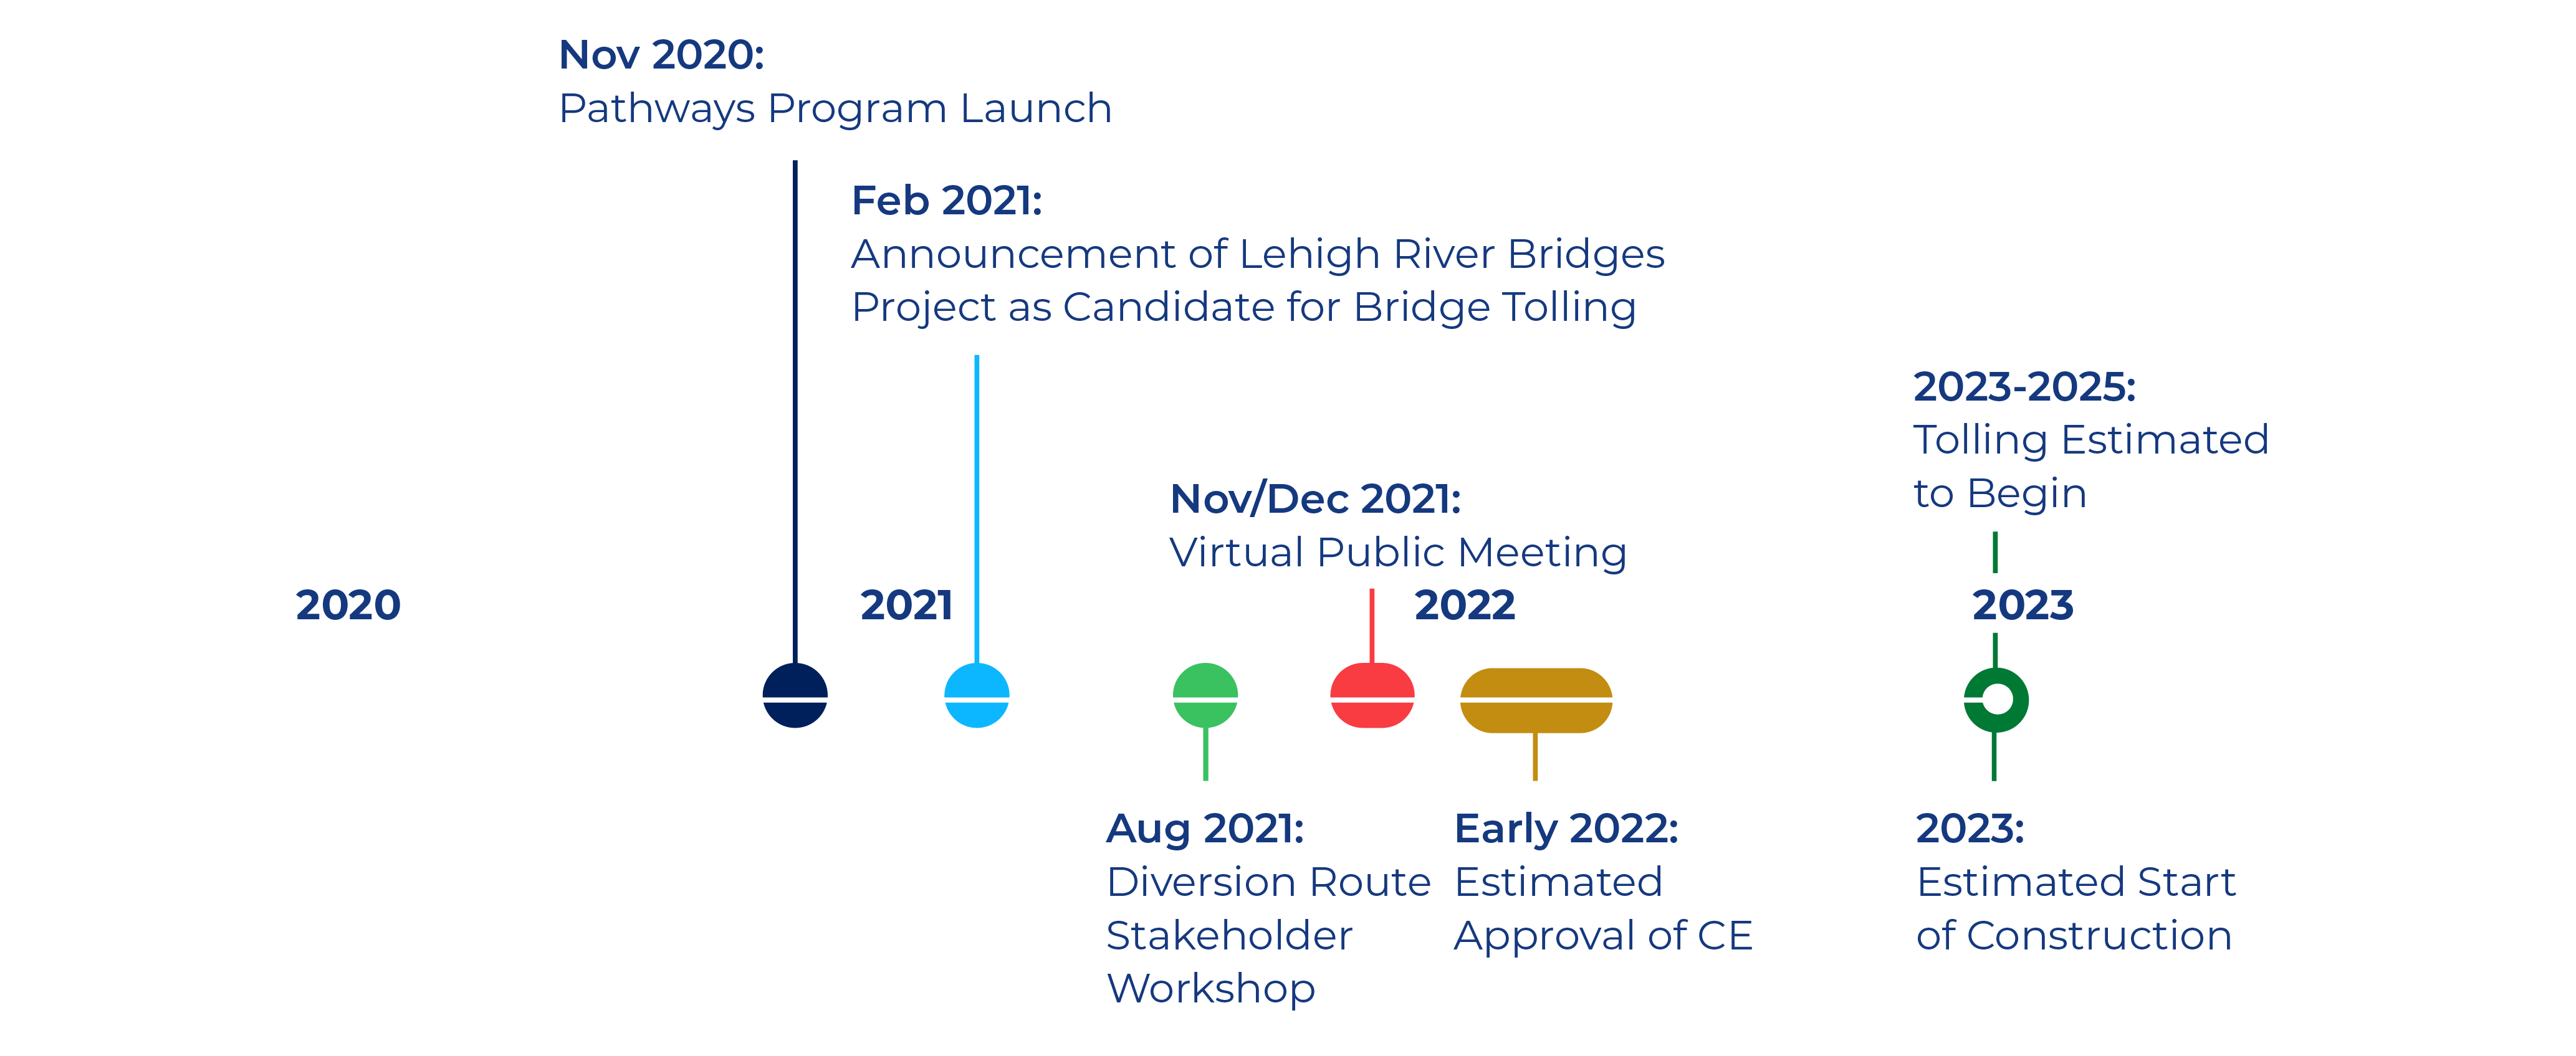 Timeline: Pathways Program launches in November 2020. Announcement of I-80 Lehigh River Bridges Project as a candidate for bridge tolling in February 2021. Diversion route stakeholder workshop in August 2021. Virtual public meeting in November-December 2021. Estimated approval of CE in early 2022. Estimated start of construction in 2023. Tolling estimated to begin in 2023-2025.